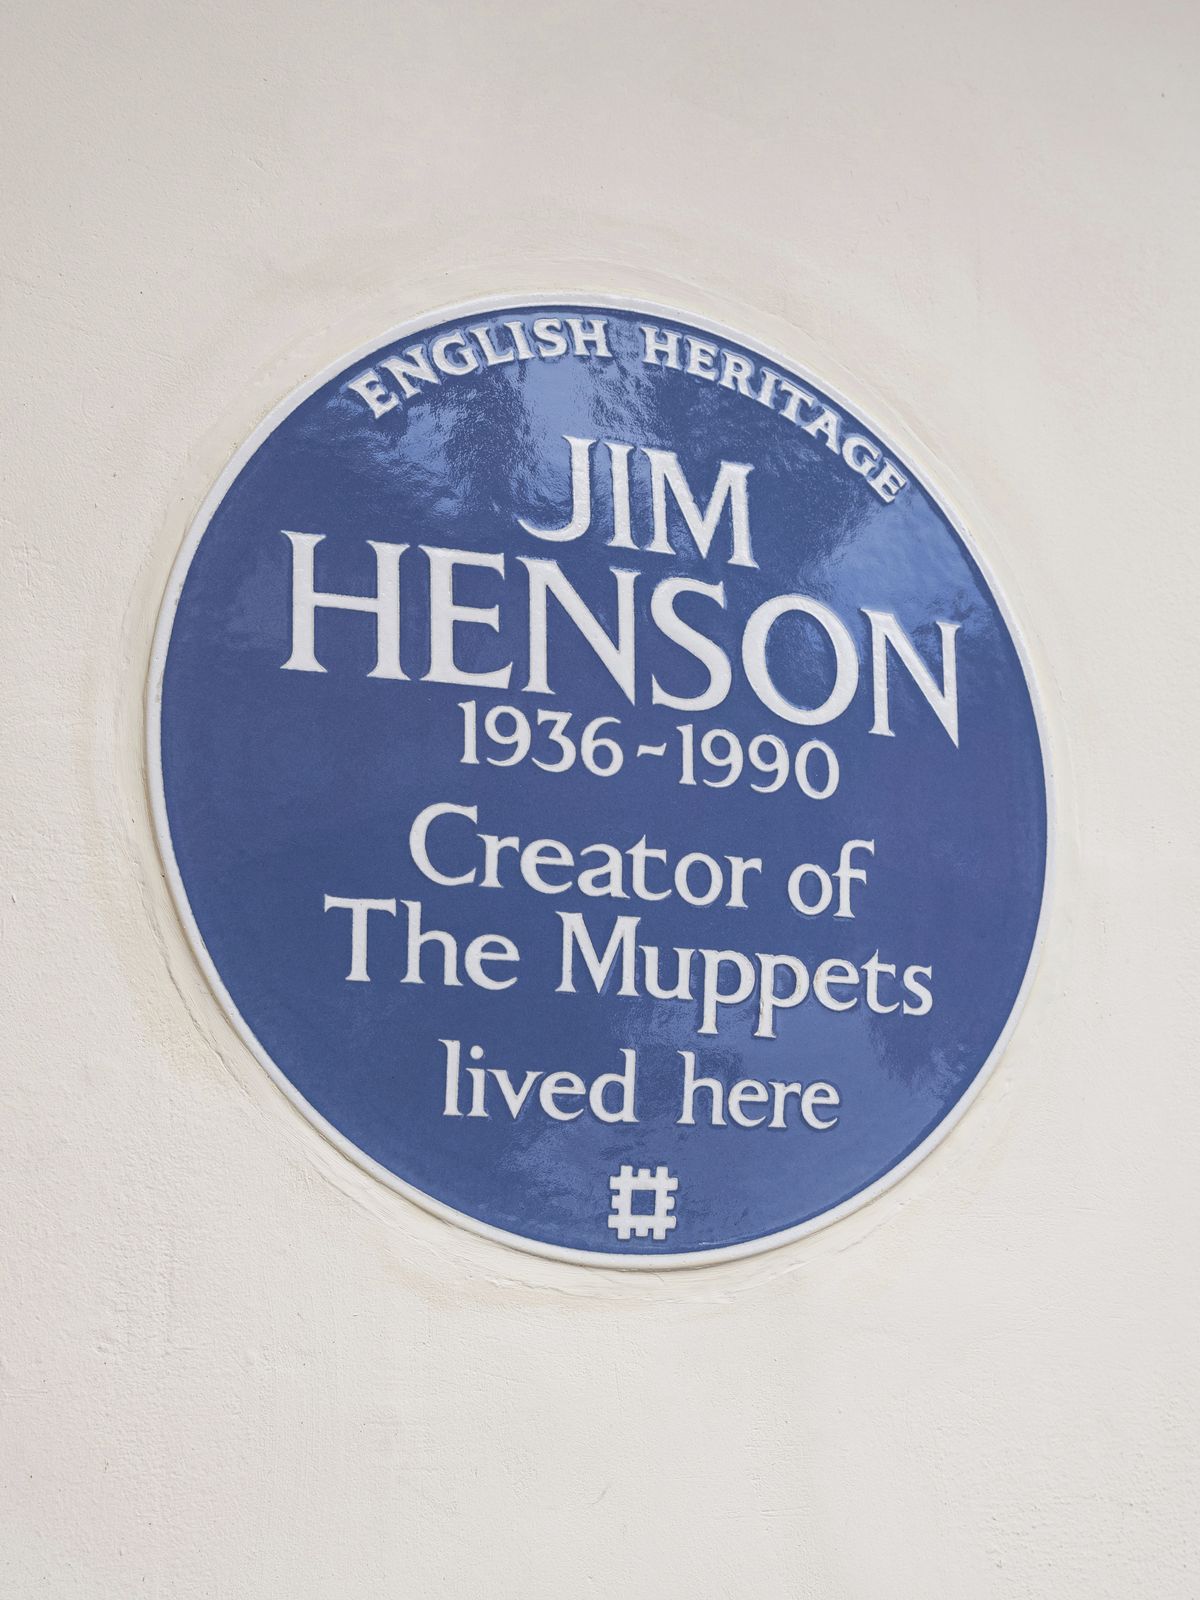 In this undated photo provided by English Heritage a view of the blue plaque on the former London home of Jim Henson, creator of The Muppets, who has been honoured with a blue plaque. The American creator of the Muppets was honored Tuesday, Sept, 7, 2021 in Britain with a blue plaque at his former home in north London, which he bought after ‘The Muppet Show’ was commissioned for British television — 50 Downshire Hill in Hampstead in north London to be precise.  (HONS)